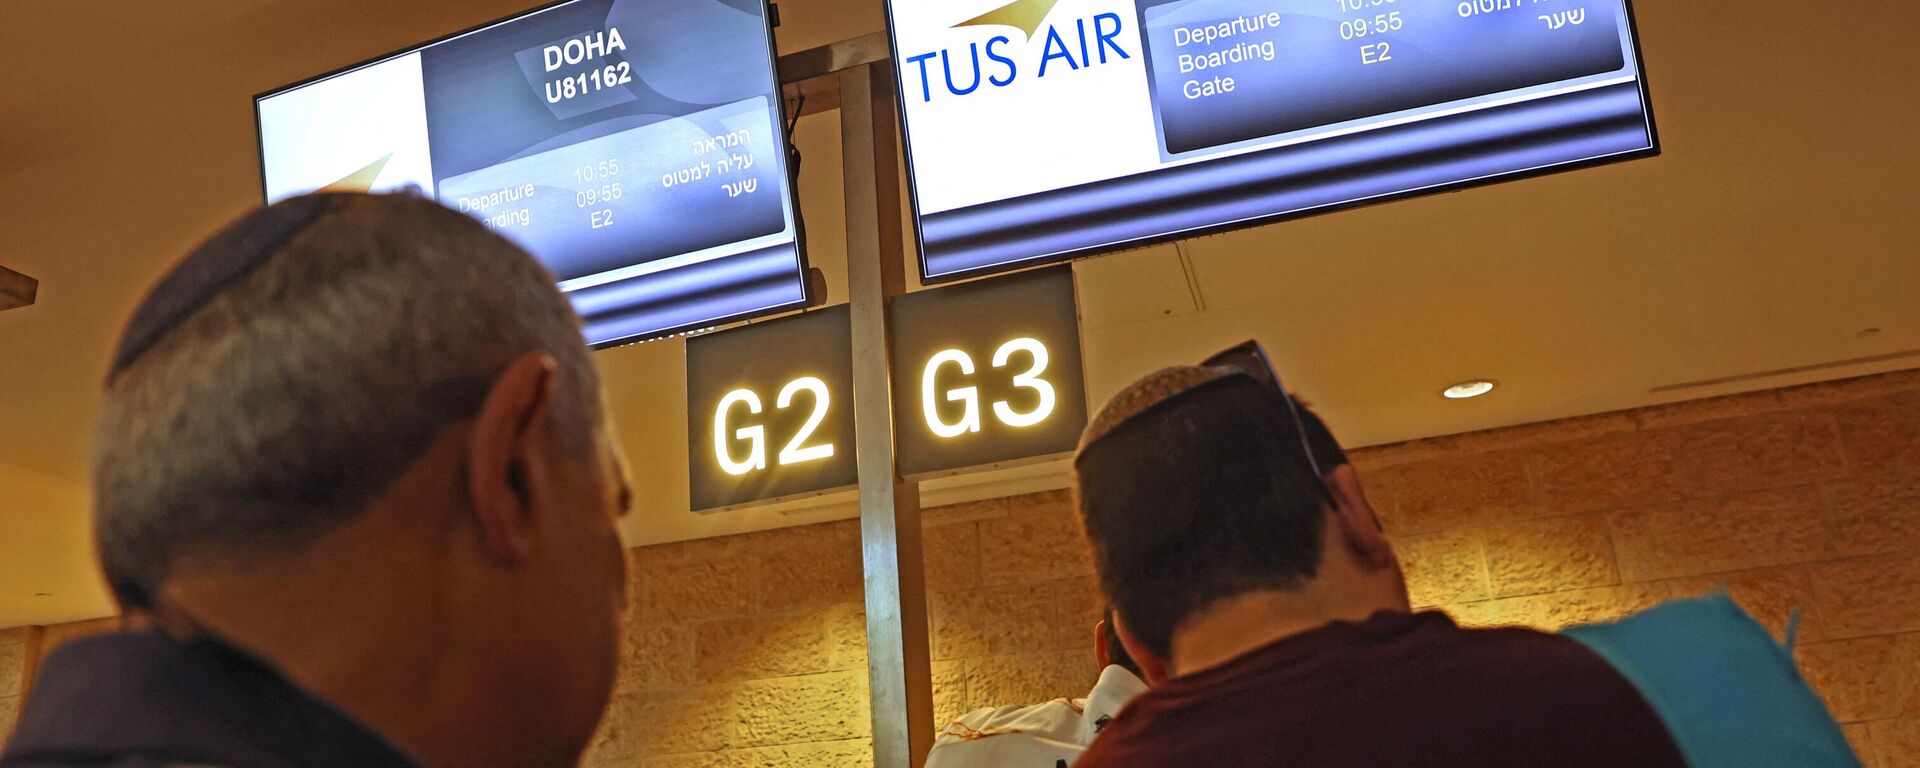 Football fans check in at a counter in Israel's Ben Gourion international airport, for a flight to Doha to attend the World Cup 2022 tournament - Sputnik International, 1920, 20.11.2022